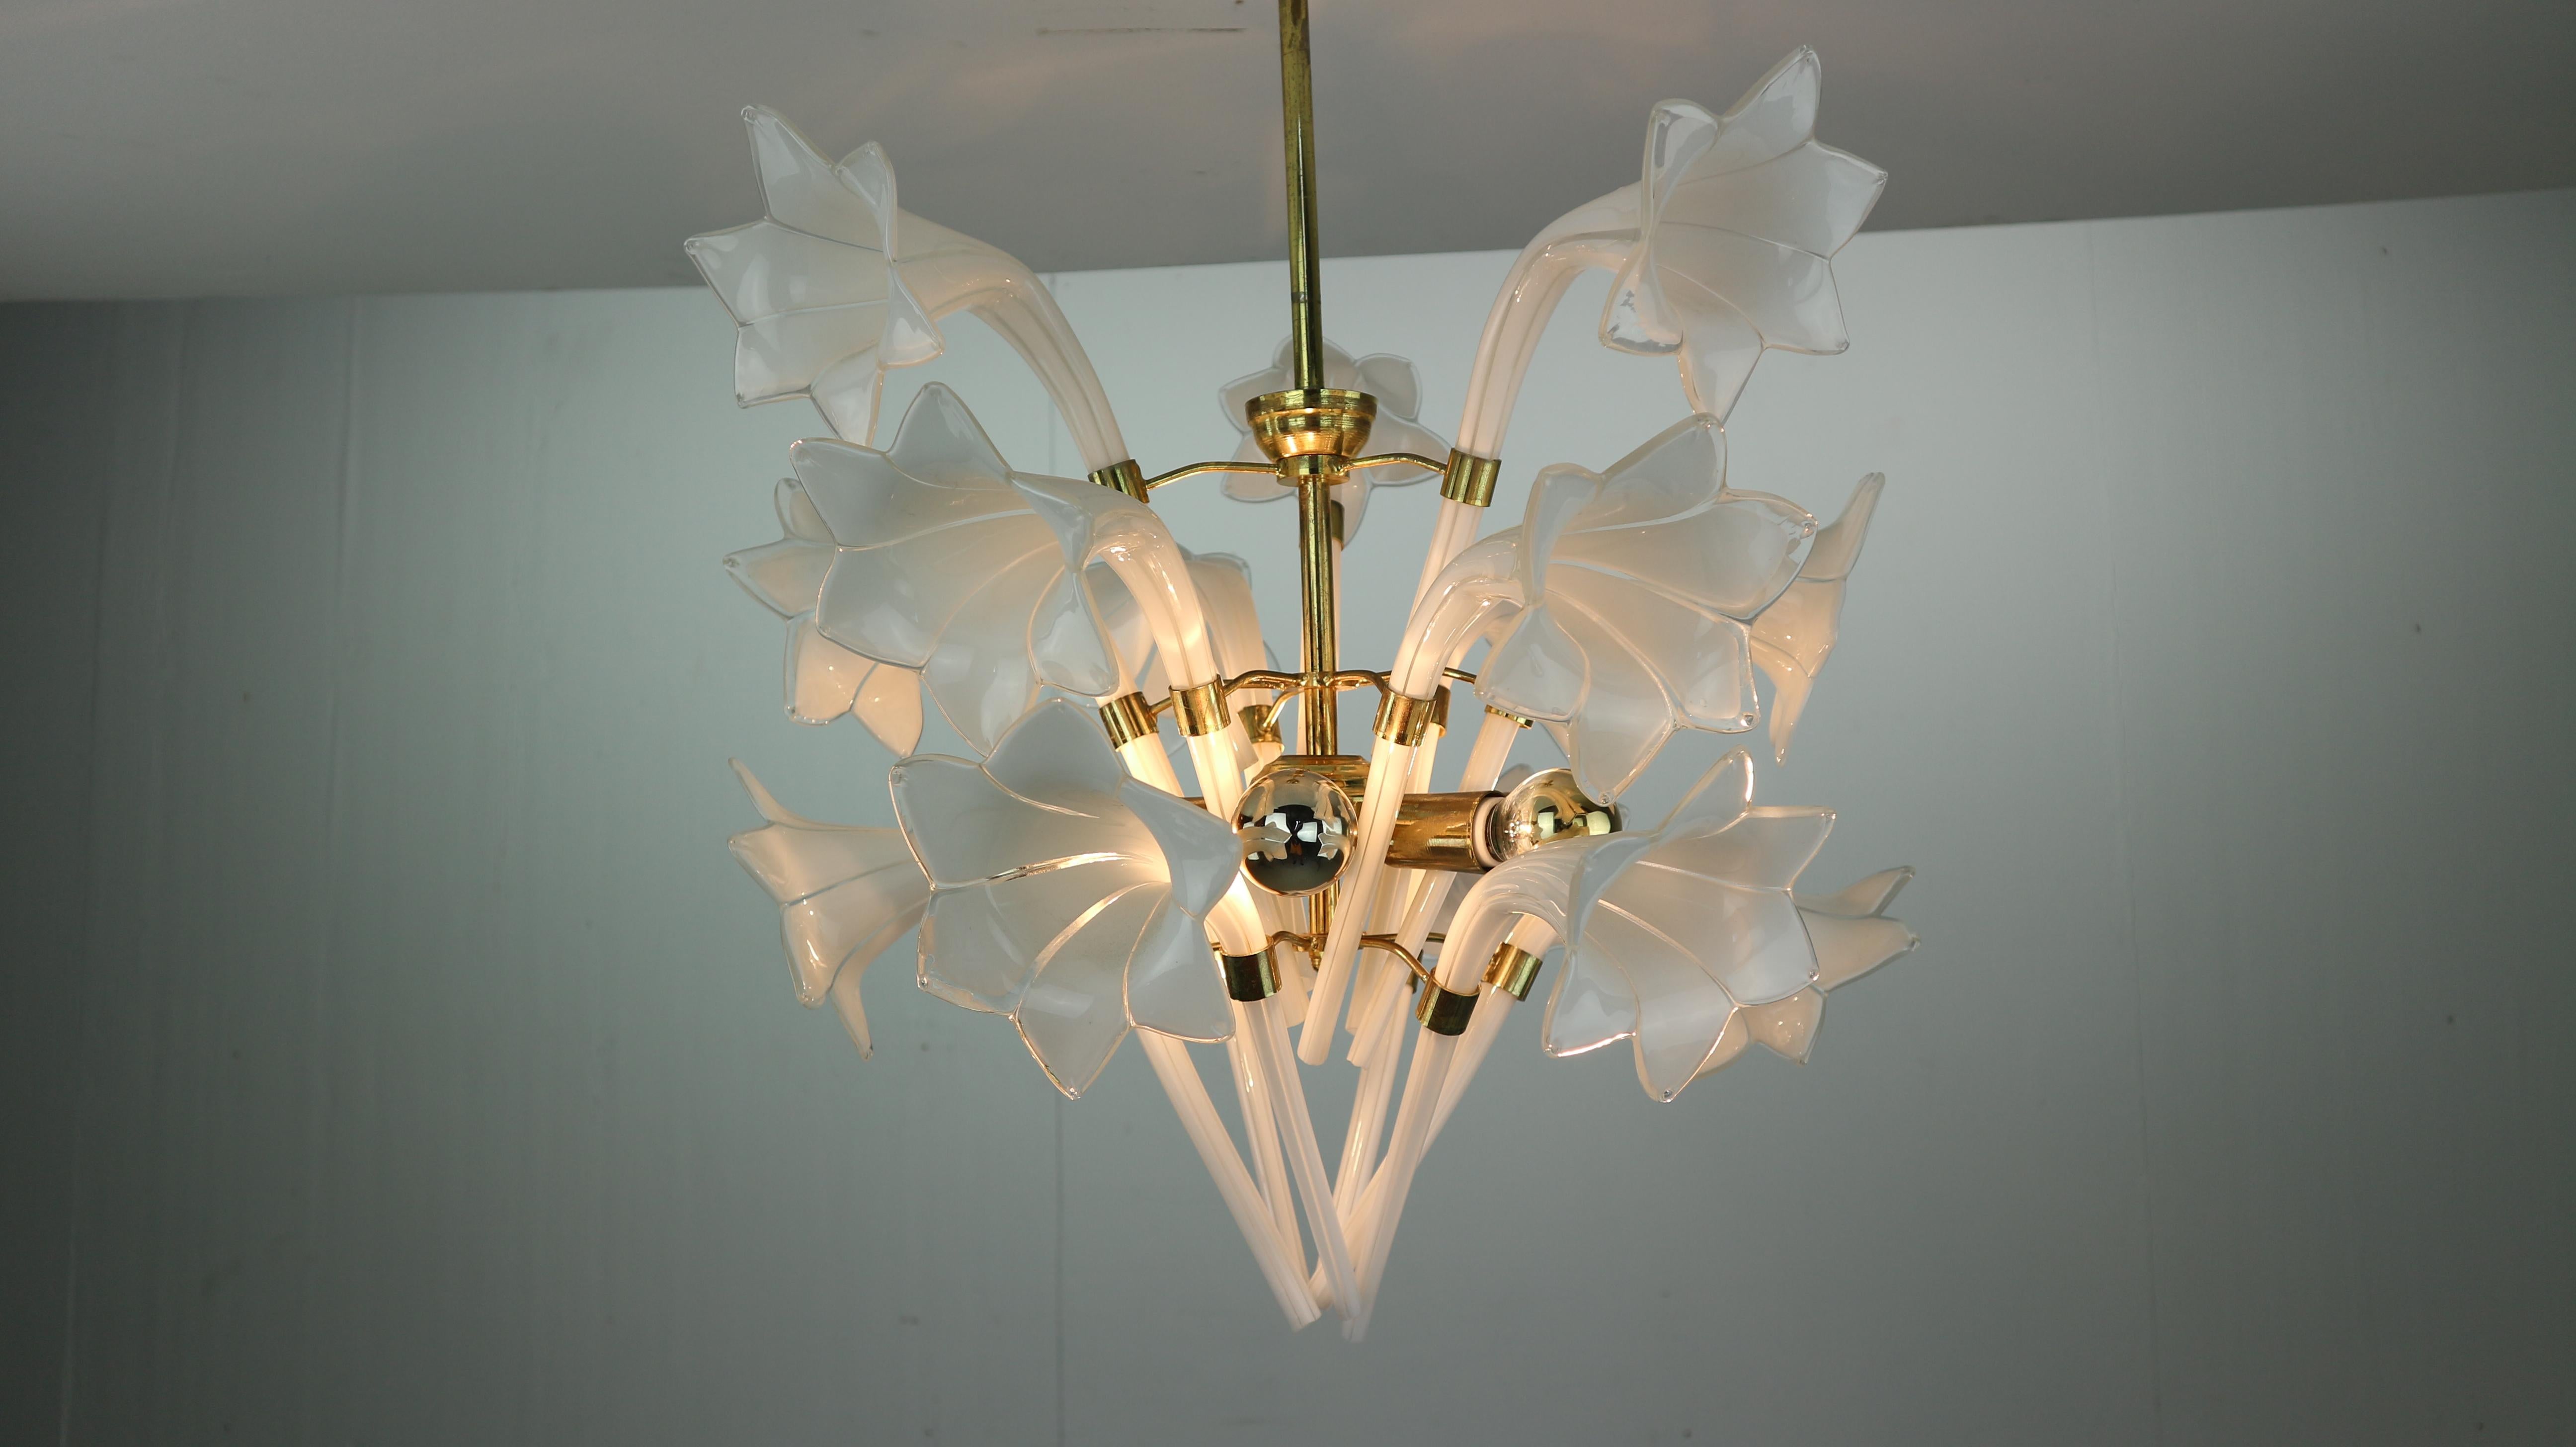 A beautiful Italian hanging lamp chandelier. The lamp is attributed to Franco Luce. The glass flowers and leaves are mouth-blown and hand-formed. The 12 glass flowers and 6 Calla leaves can be taken apart and mounted on a brass frame. The lamp has 6